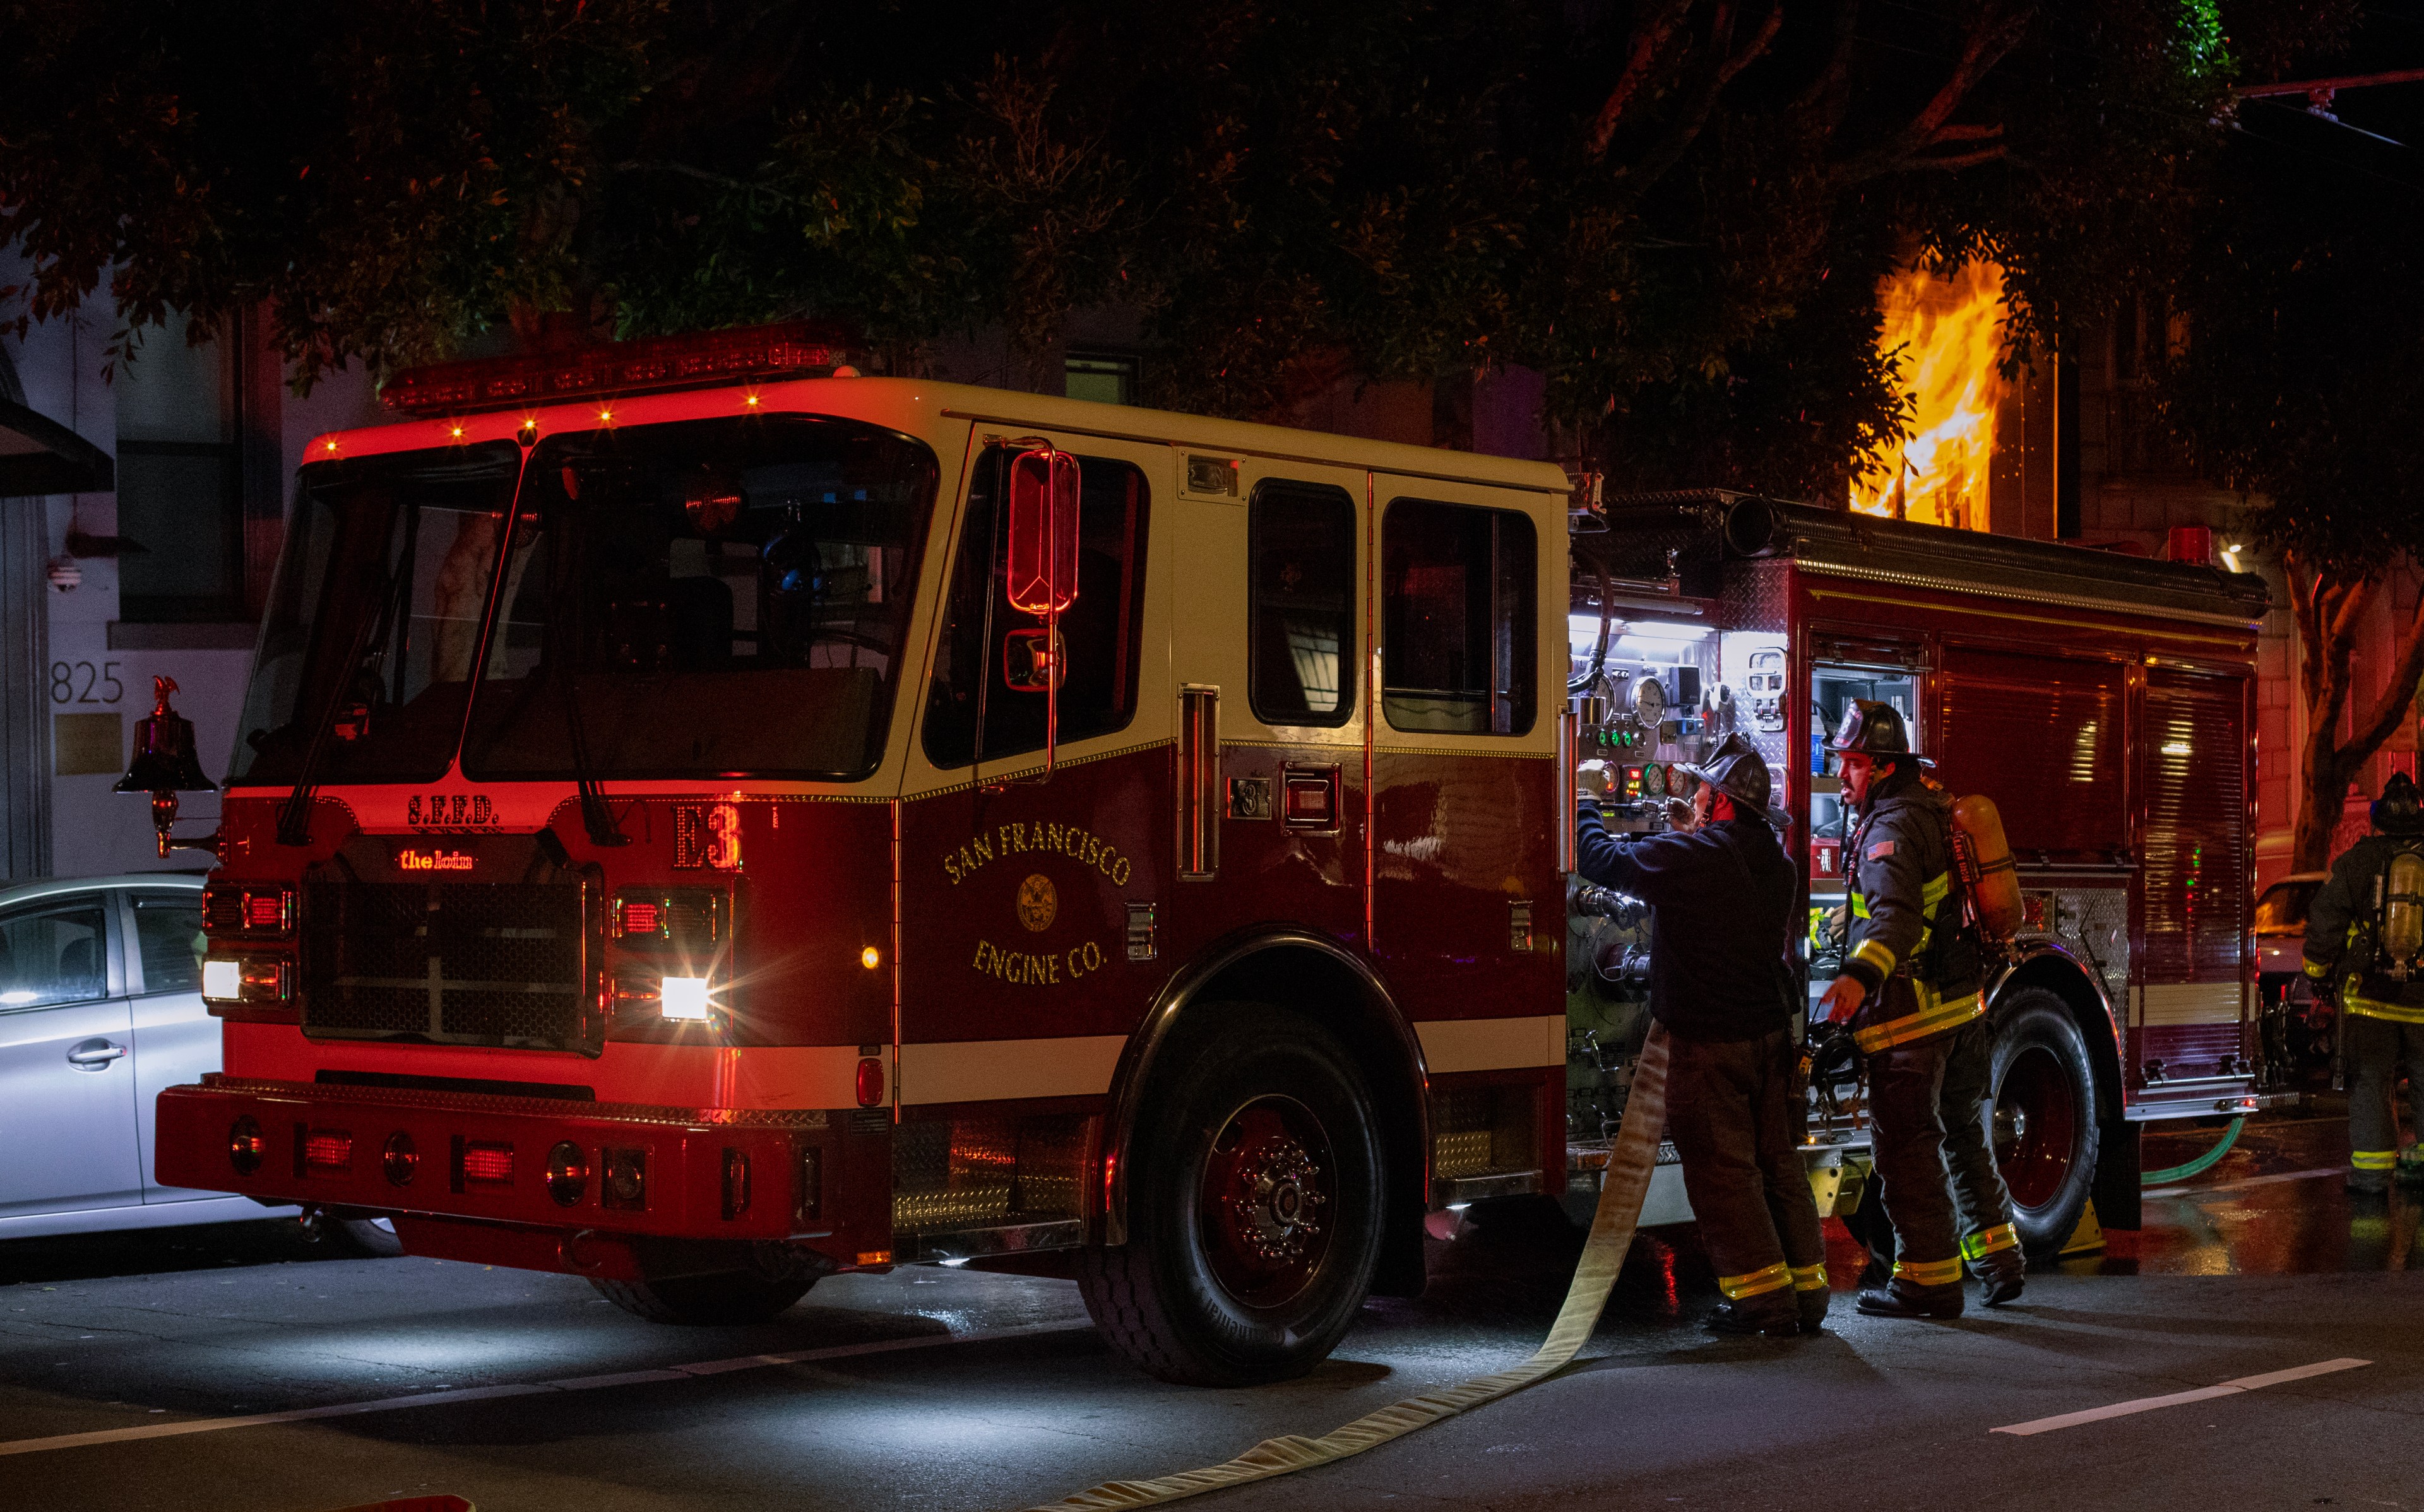 Firefighters stand by an engine at night parked outside an apartment building with fire coming from a window.